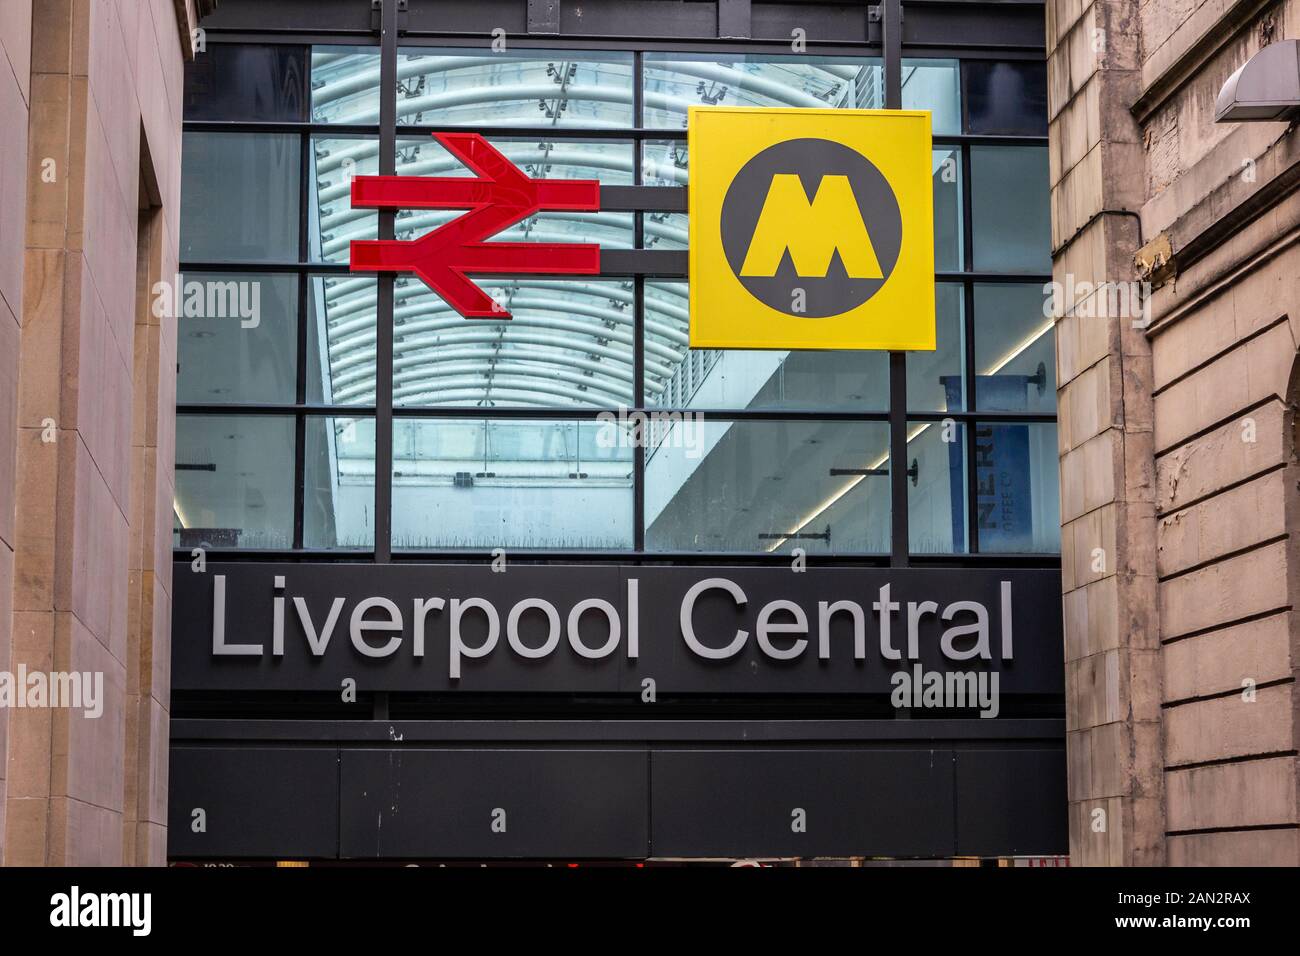 Liverpool Central underground railway station entrance sign Stock Photo